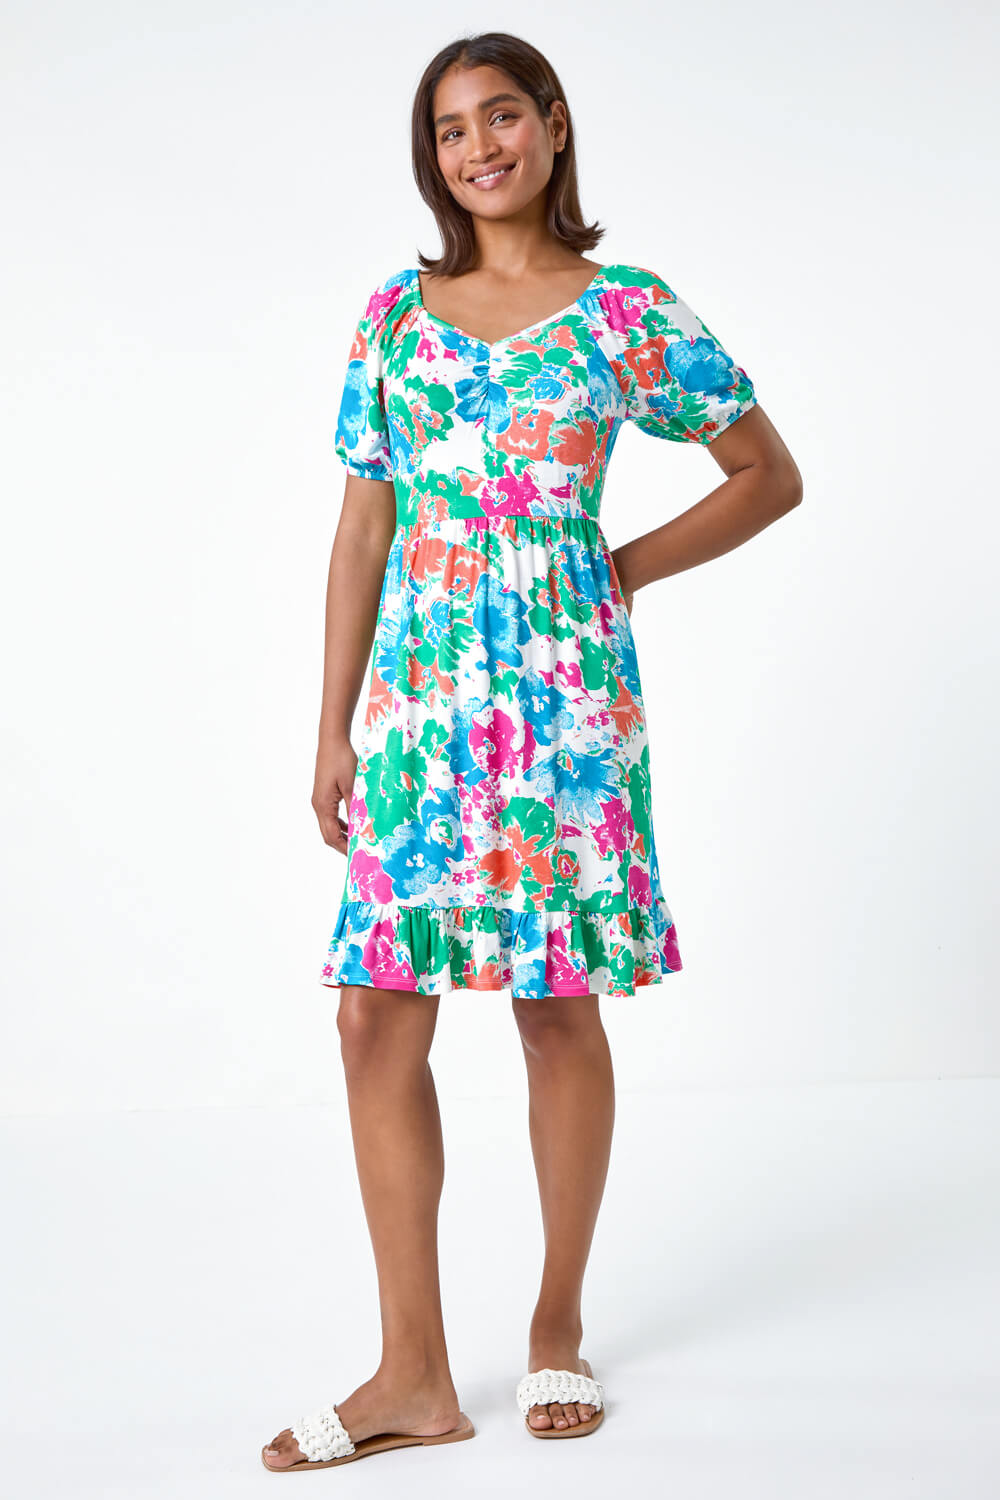 Blue Abstract Floral Ruched Frill Stretch Dress, Image 2 of 5